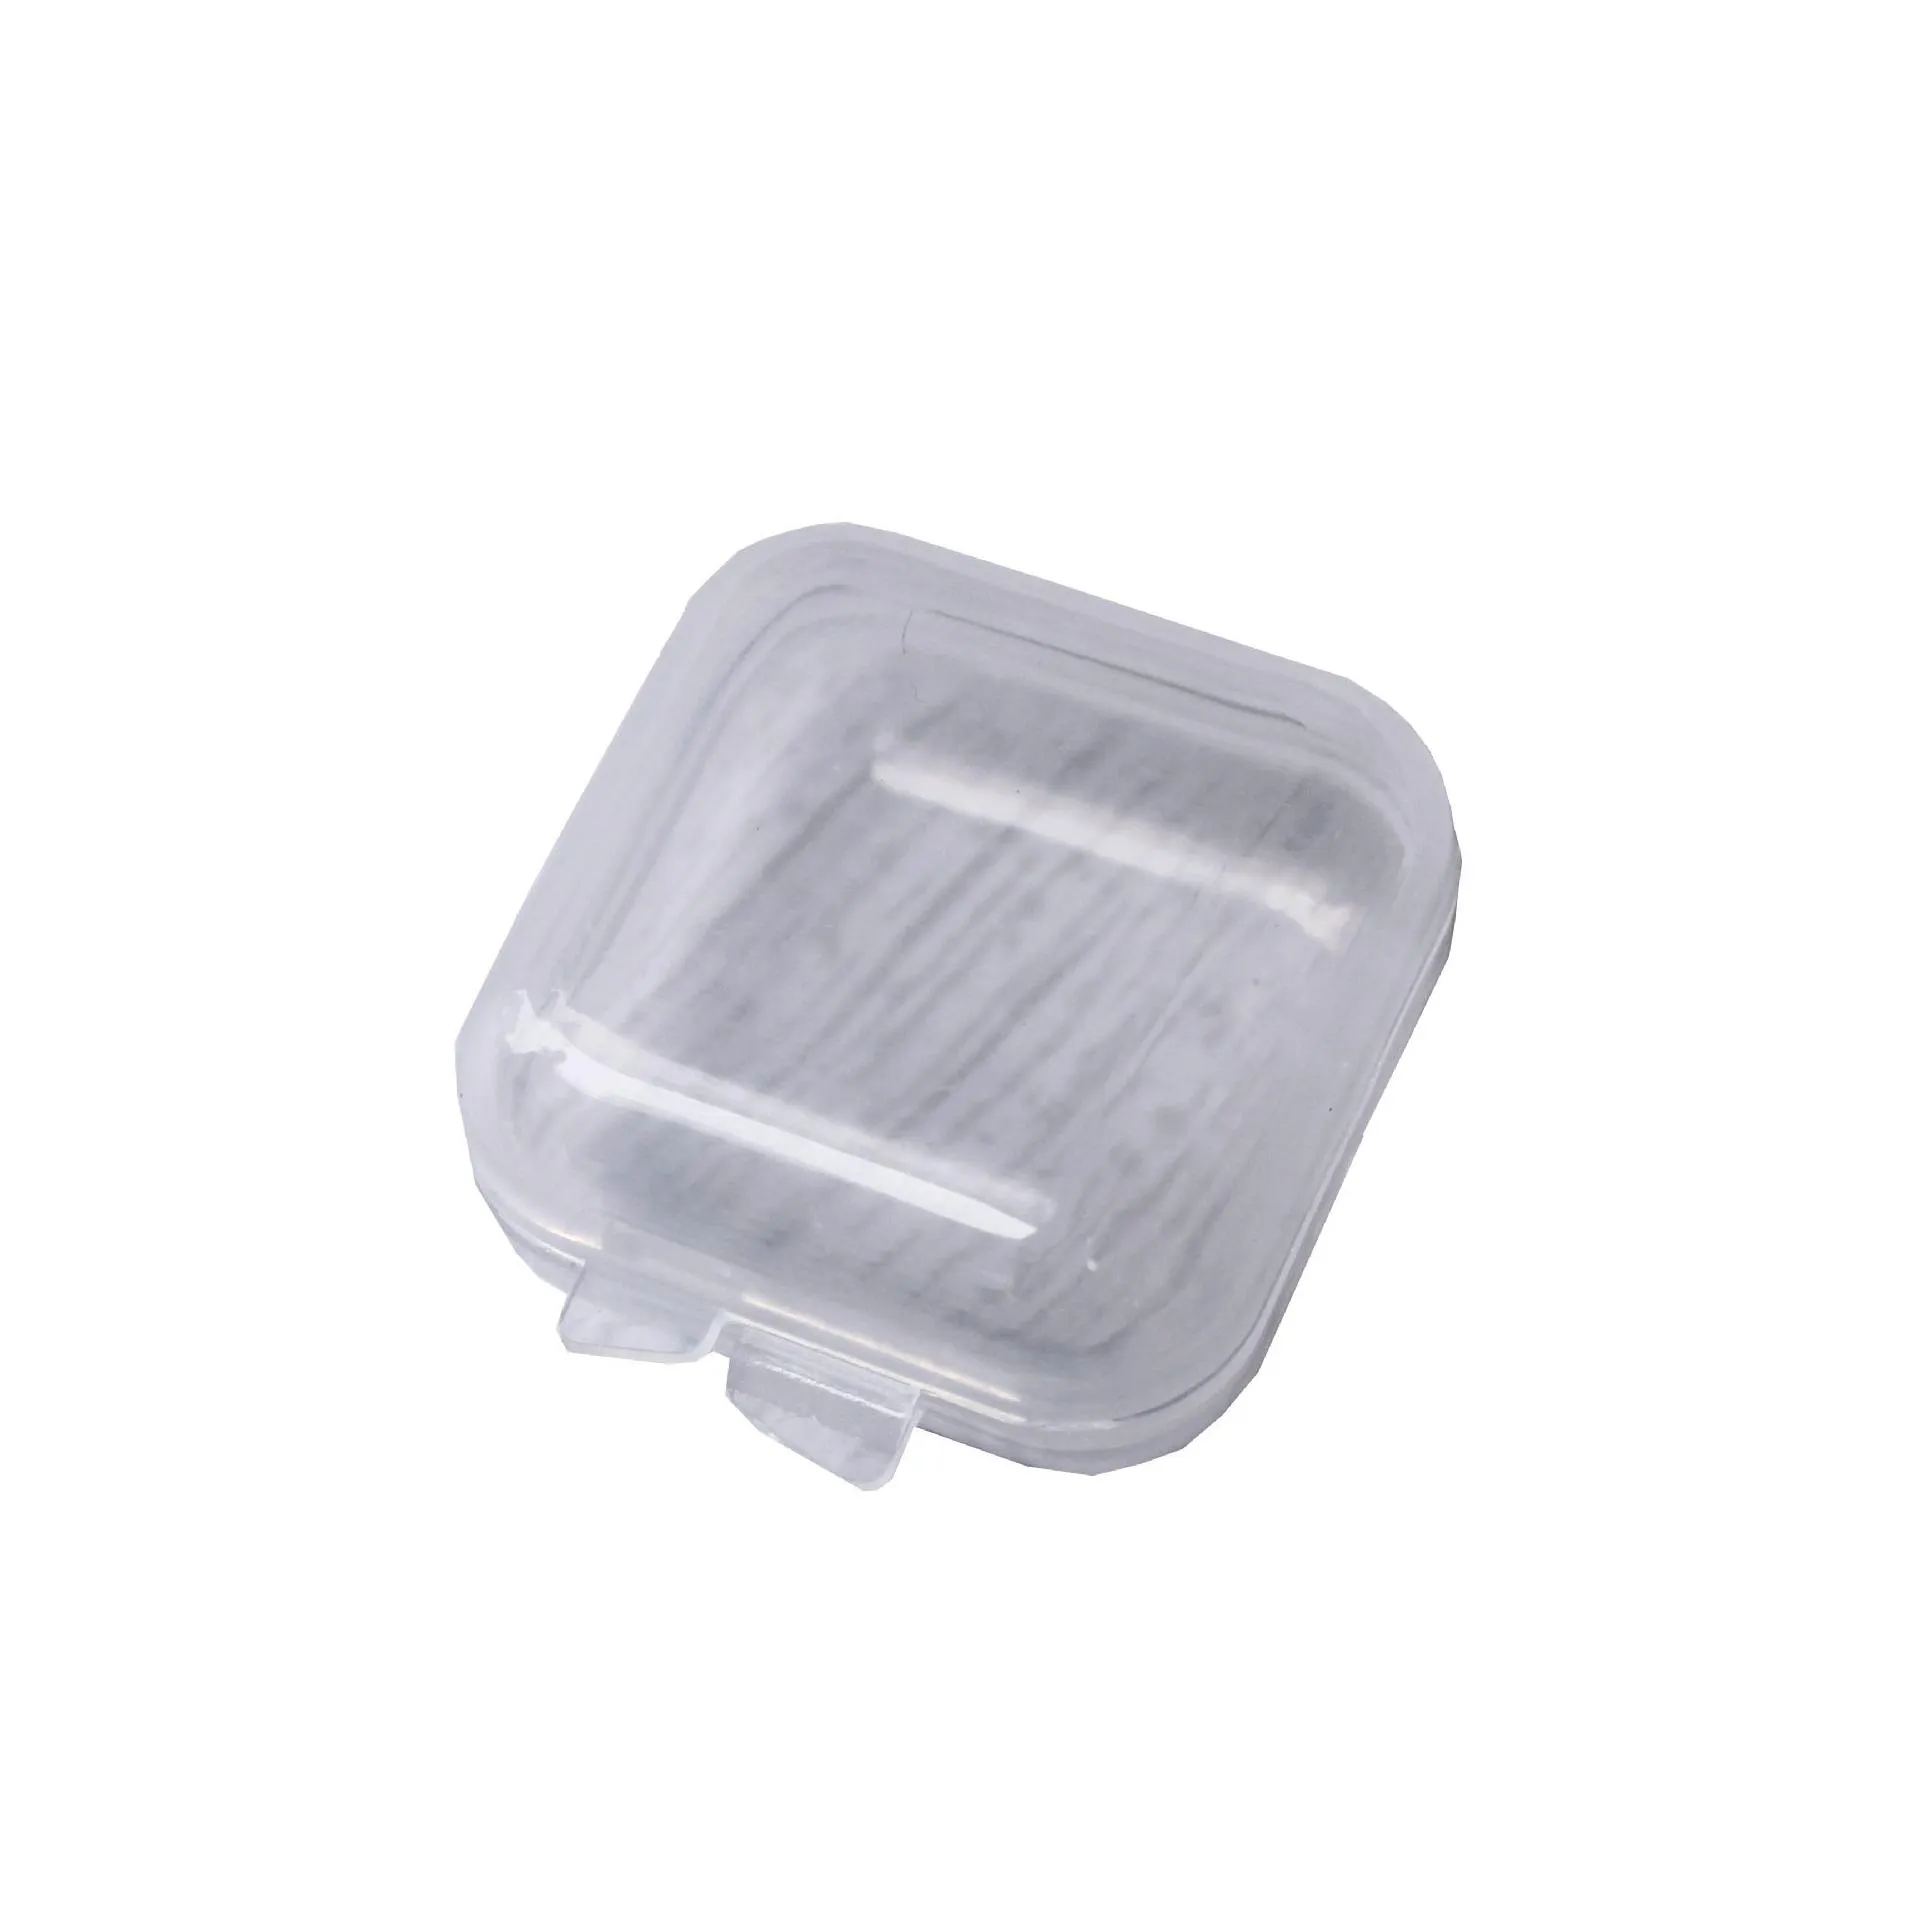 Storage Boxes & Bins Square Empty Mini Clear Plastic Storage Containers Box Case With Lids Small Boxs Jewelry Earplugs Zwl707 Drop Del Dhc8M